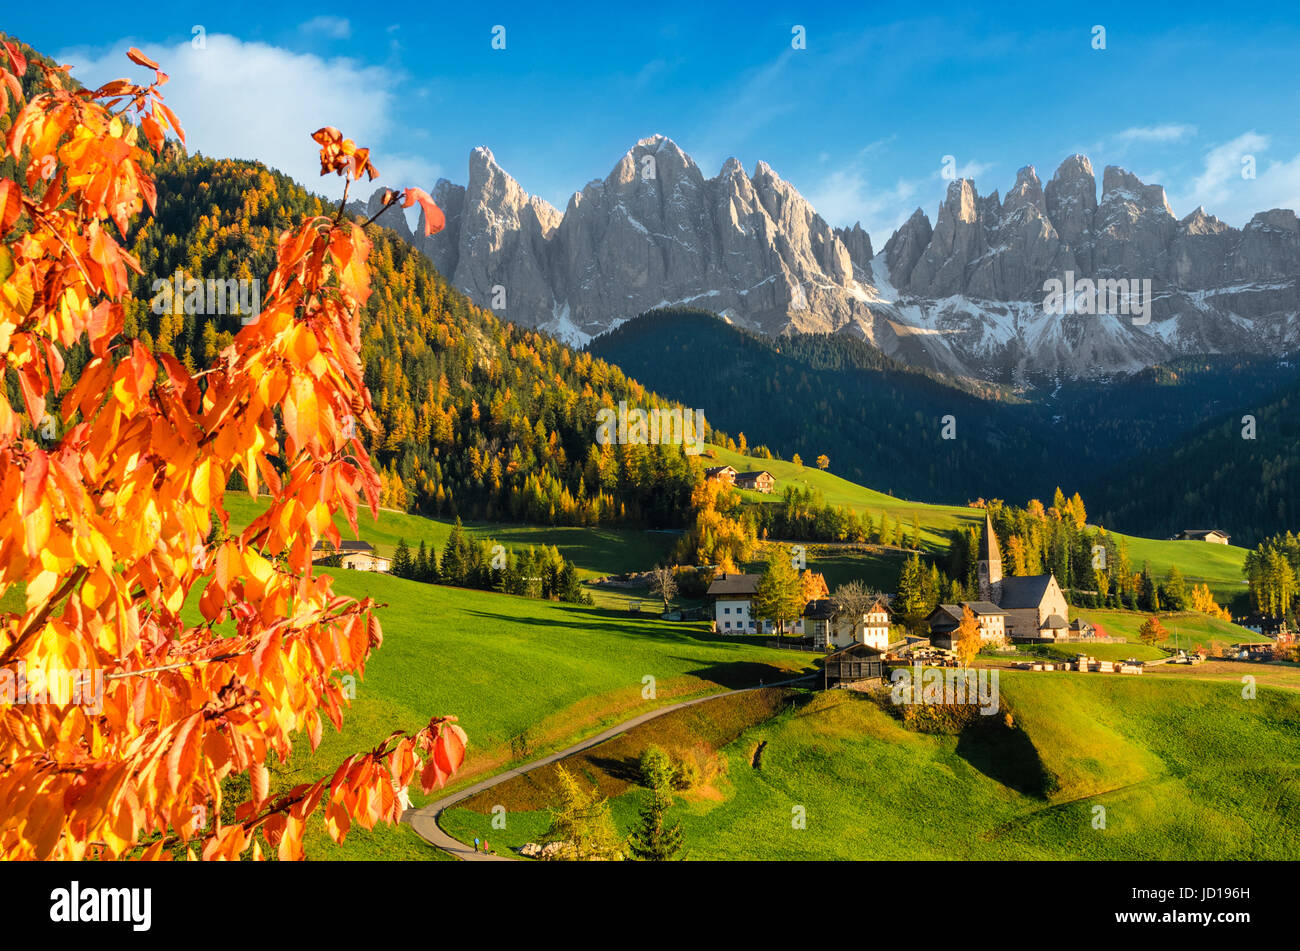 Small village Sankt Magdalena with church and houses in the Villnoesstal with Geisler Dolomites mountains and autumn foliage in Funes valley, Italy. Stock Photo